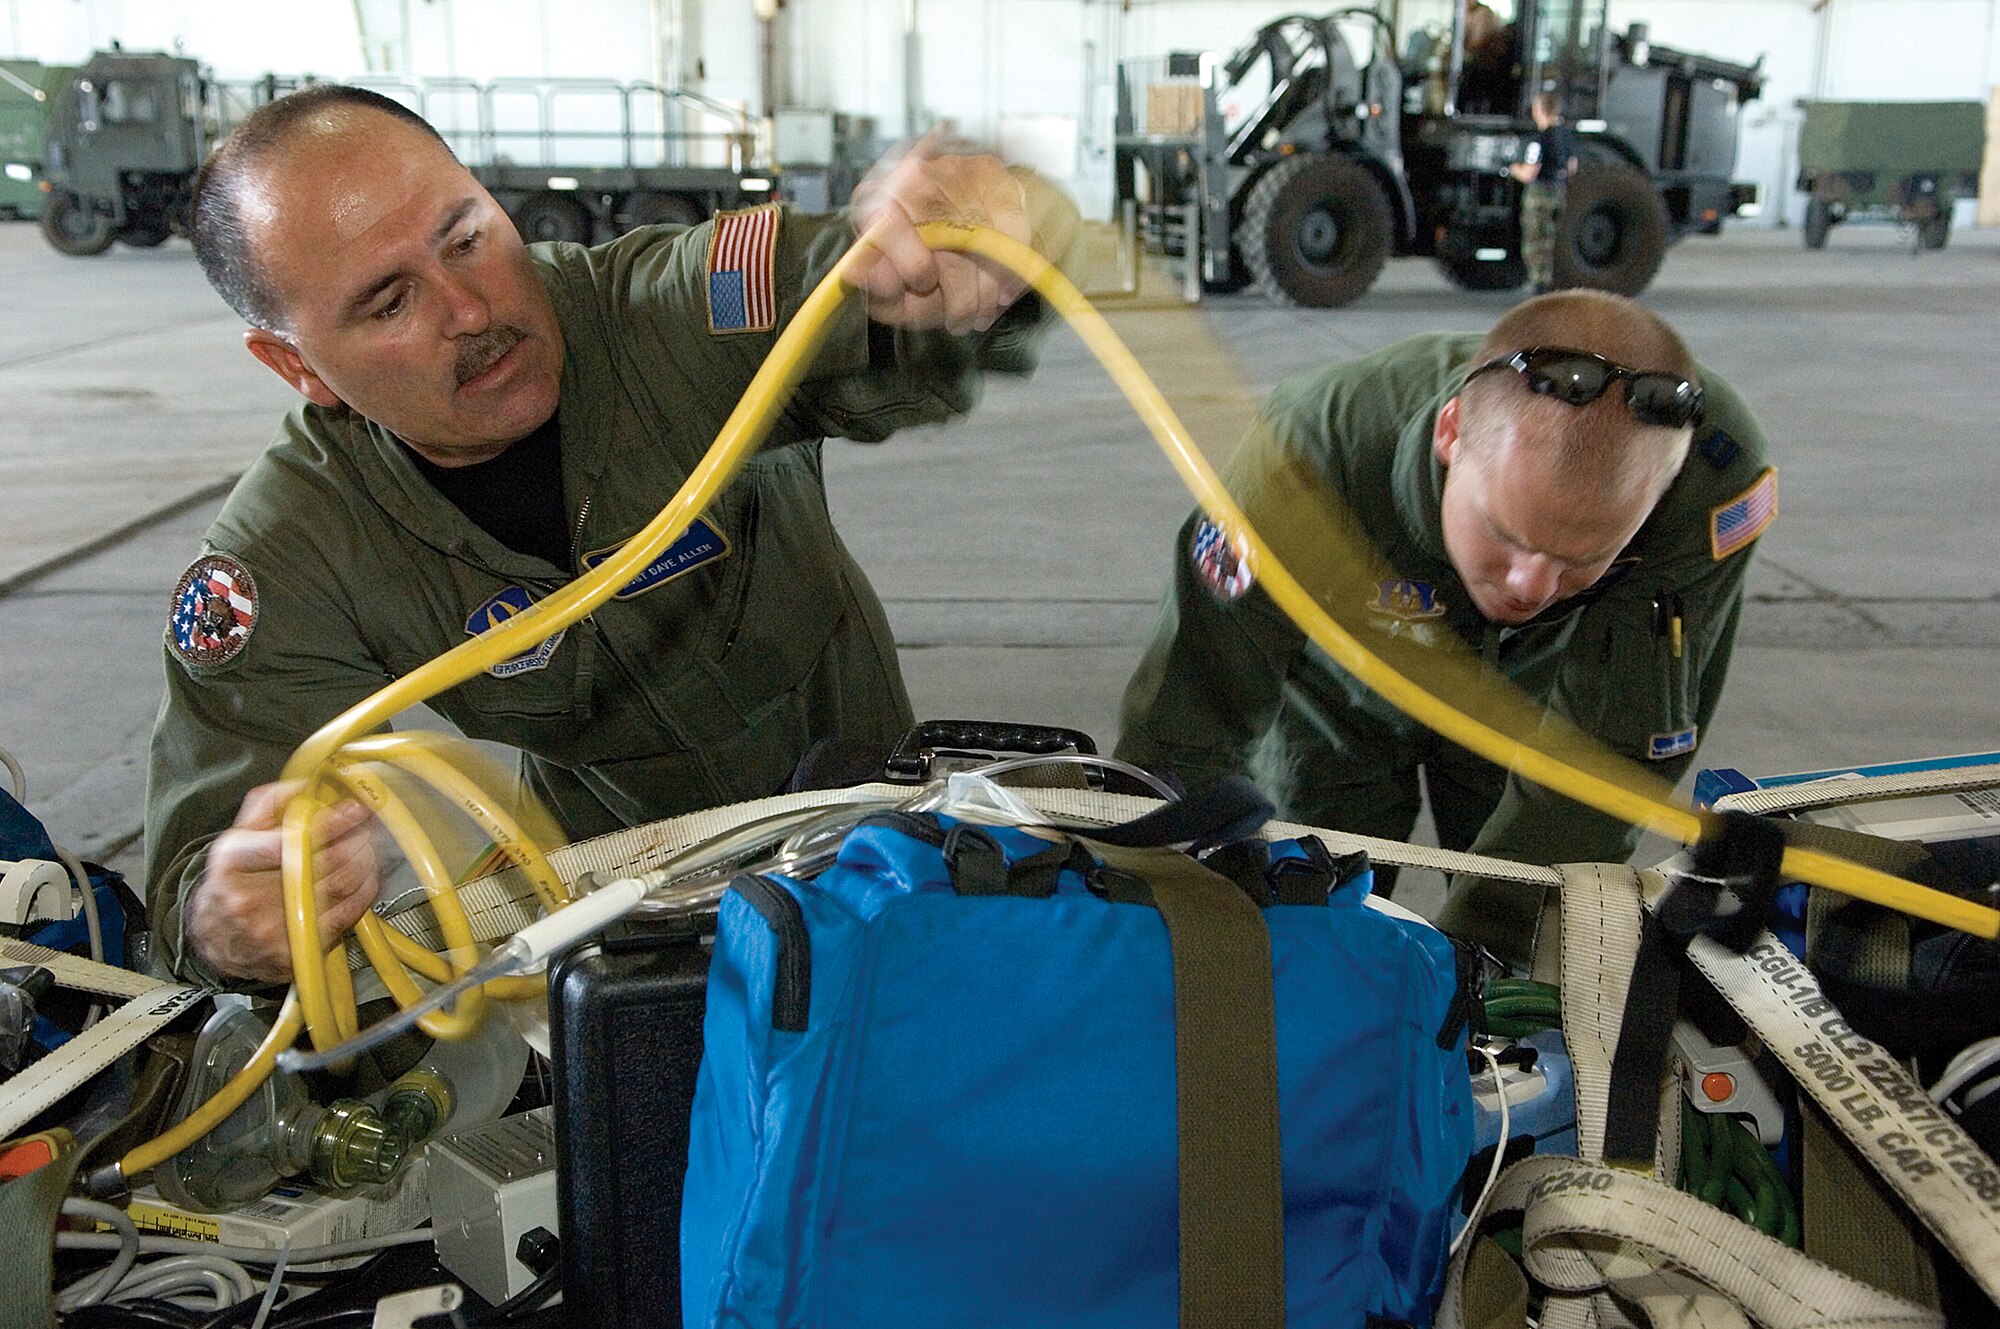 Air Force Reserve Airmen, Tech. Sgt. Dave Allen, left, and Capt. Joe Foss, both from  the 446th Aeromedical Evacuation Squadron, McChord Air Force Base, Wash., prepare medical equipment to load on a KC-135 as they practice their skills for Air Mobility Command's Rodeo 2007. More than 55 U.S. and international teams are slated to participate in AMC's Rodeo 2007 to be held July 22 through 28 at McChord. The competition focuses on readiness, and features airdrop, air refueling, and other events showcasing security forces, aerial port, maintenance and aeromedical evacuation personnel. (U.S. Air Force photo/Abner Guzman)